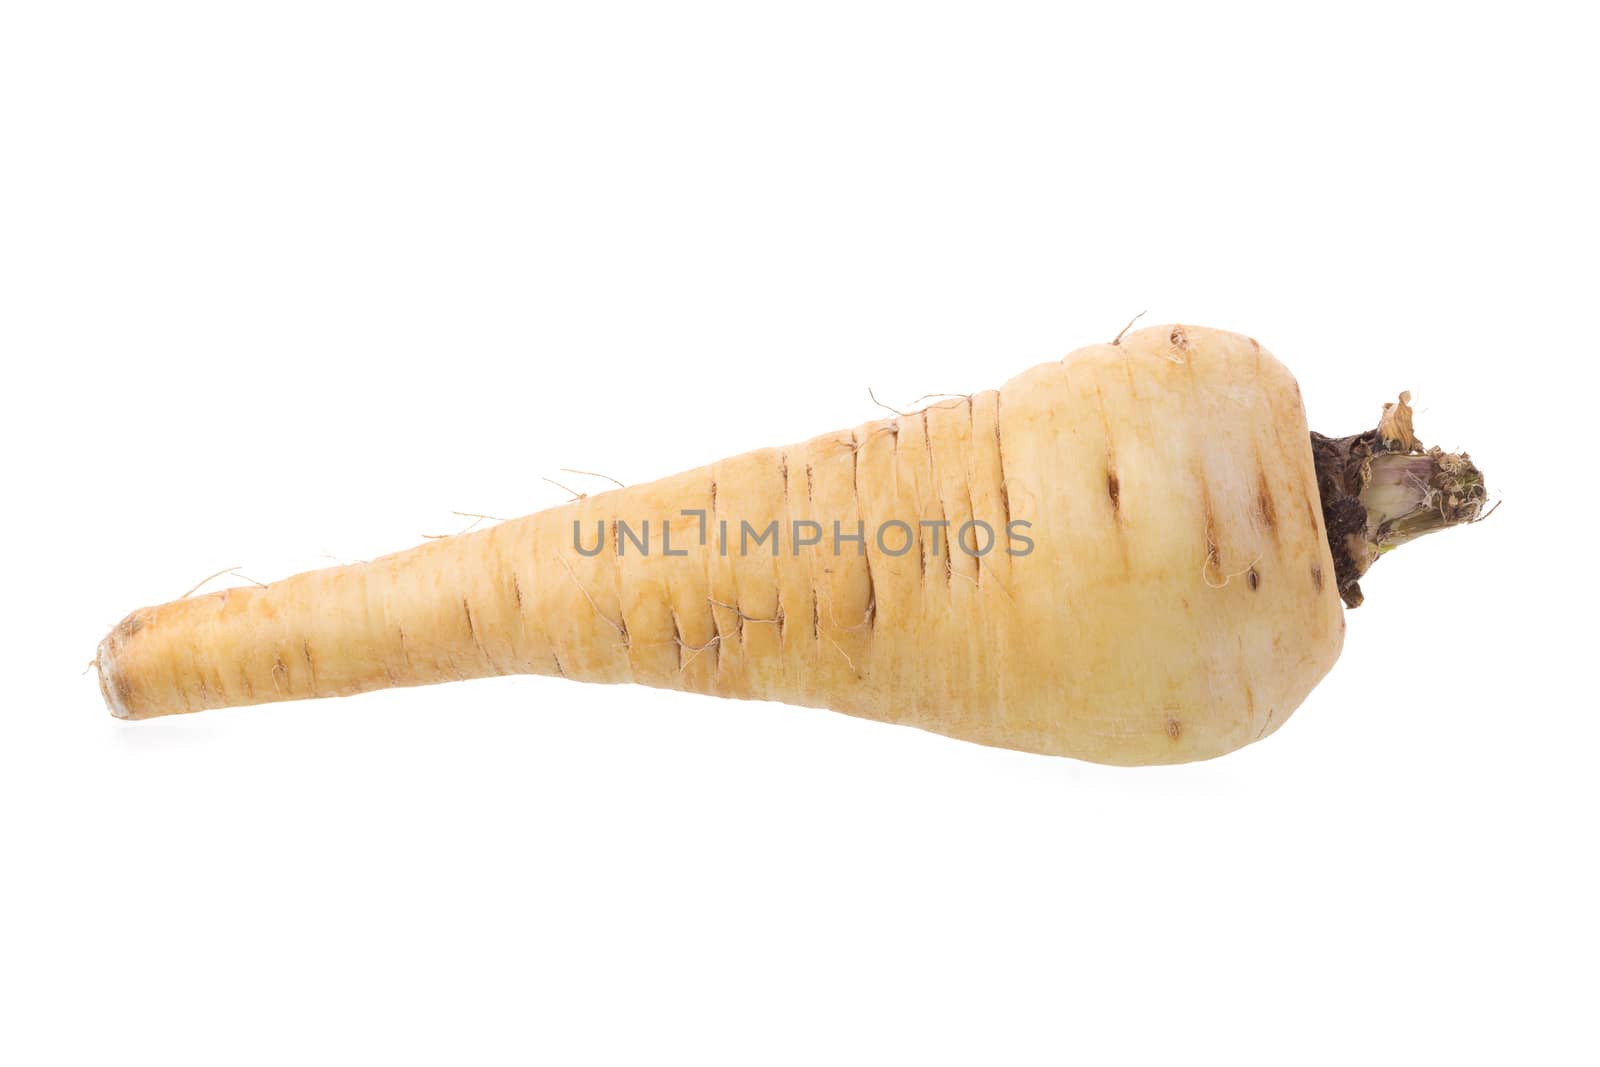 Fresh parsnip roots on a white background by kaiskynet